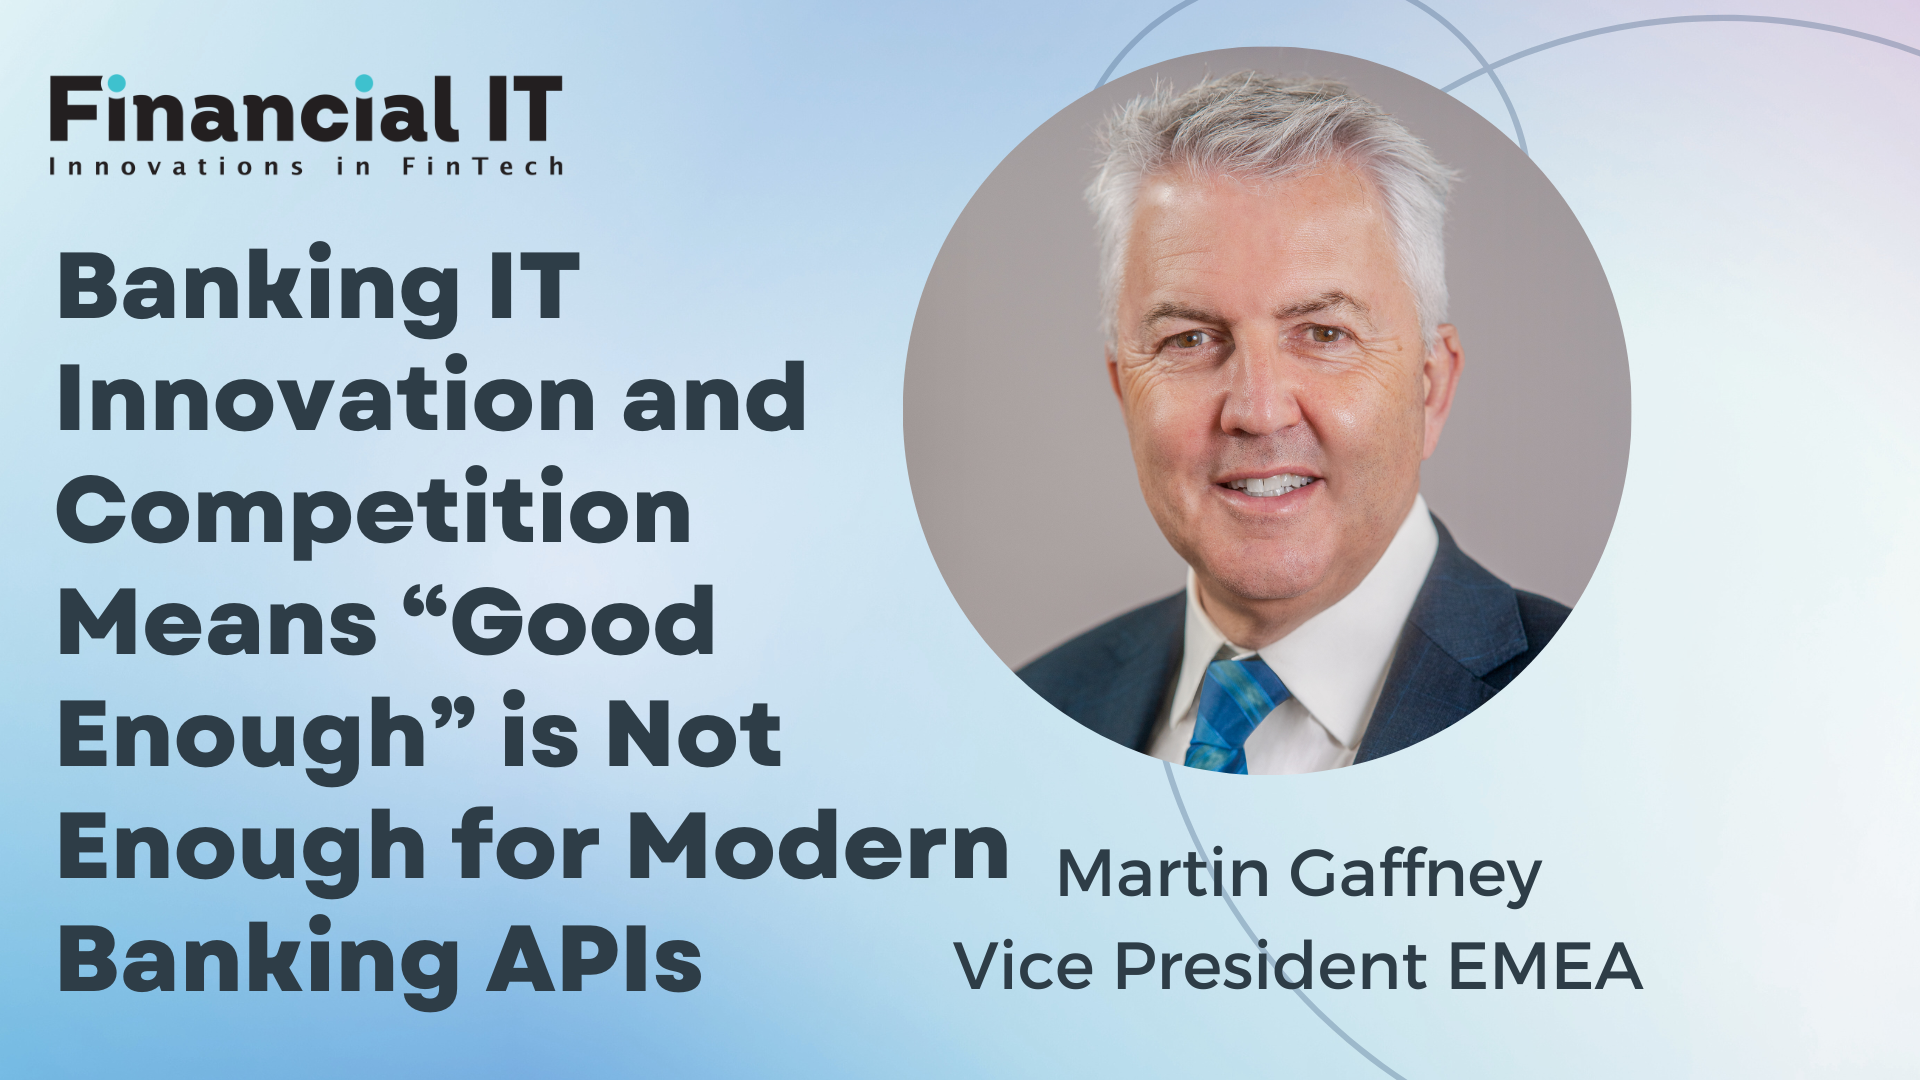 Banking IT Innovation and Competition Means “Good Enough” is Not Enough for Modern Banking APIs